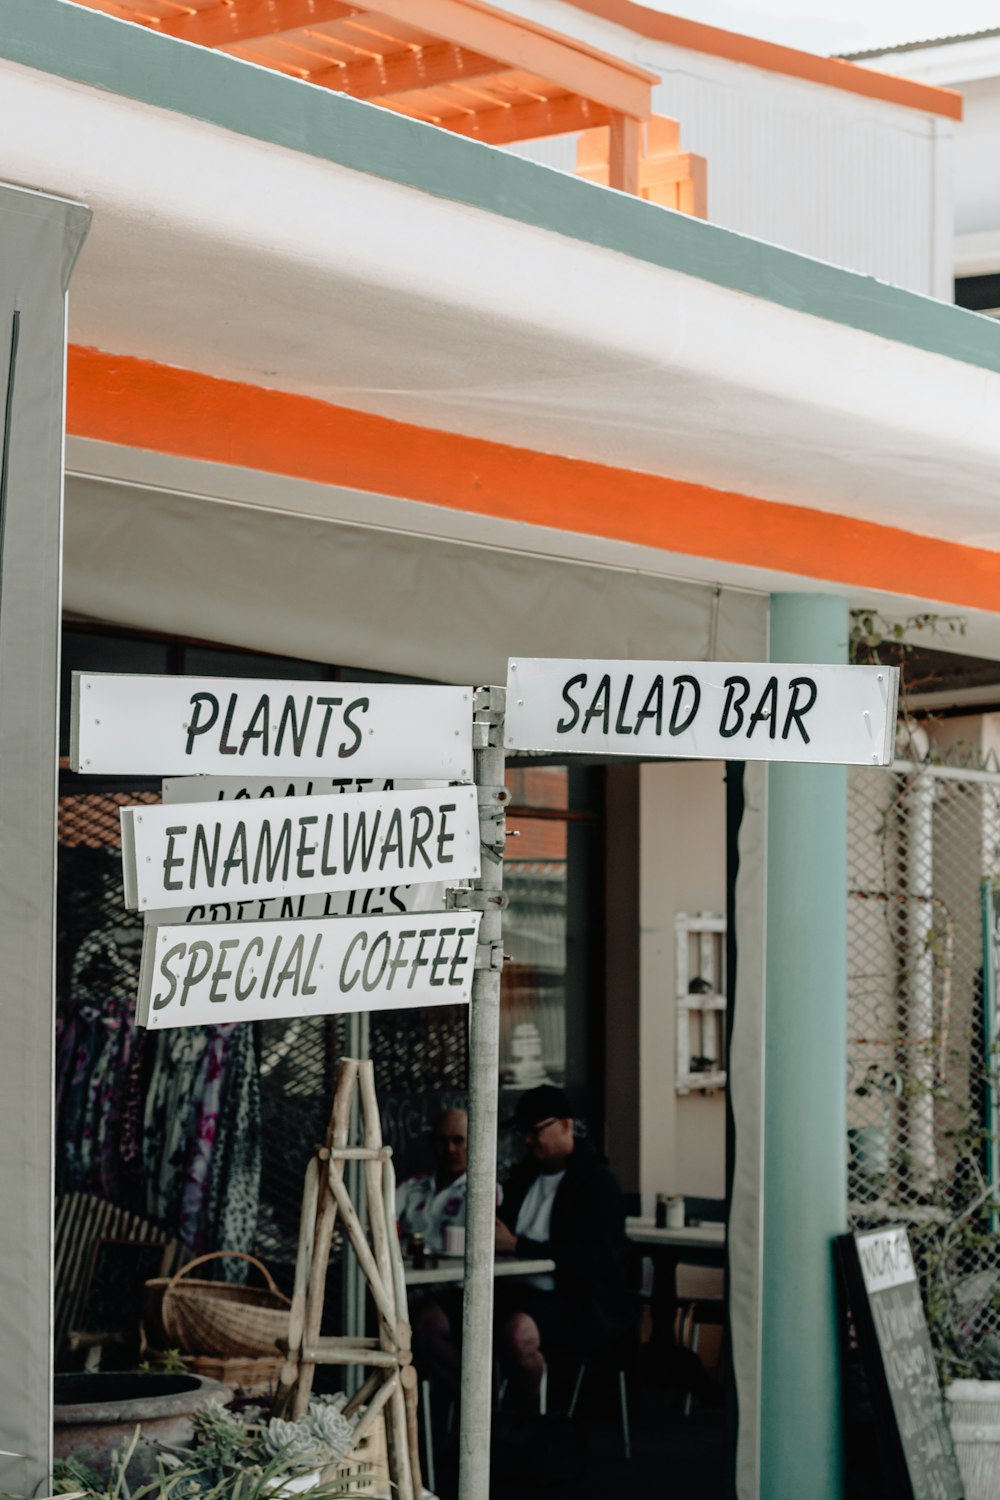 plants, enamelware, special coffee, and salad bar signage